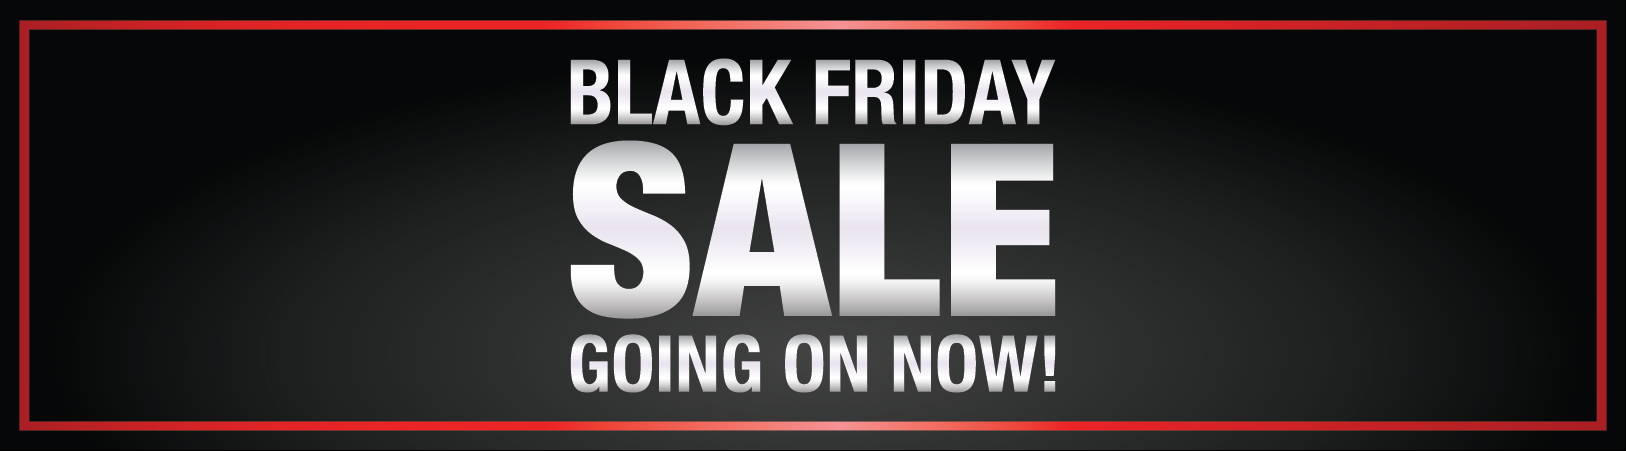 Black Friday Sale Going On Now!